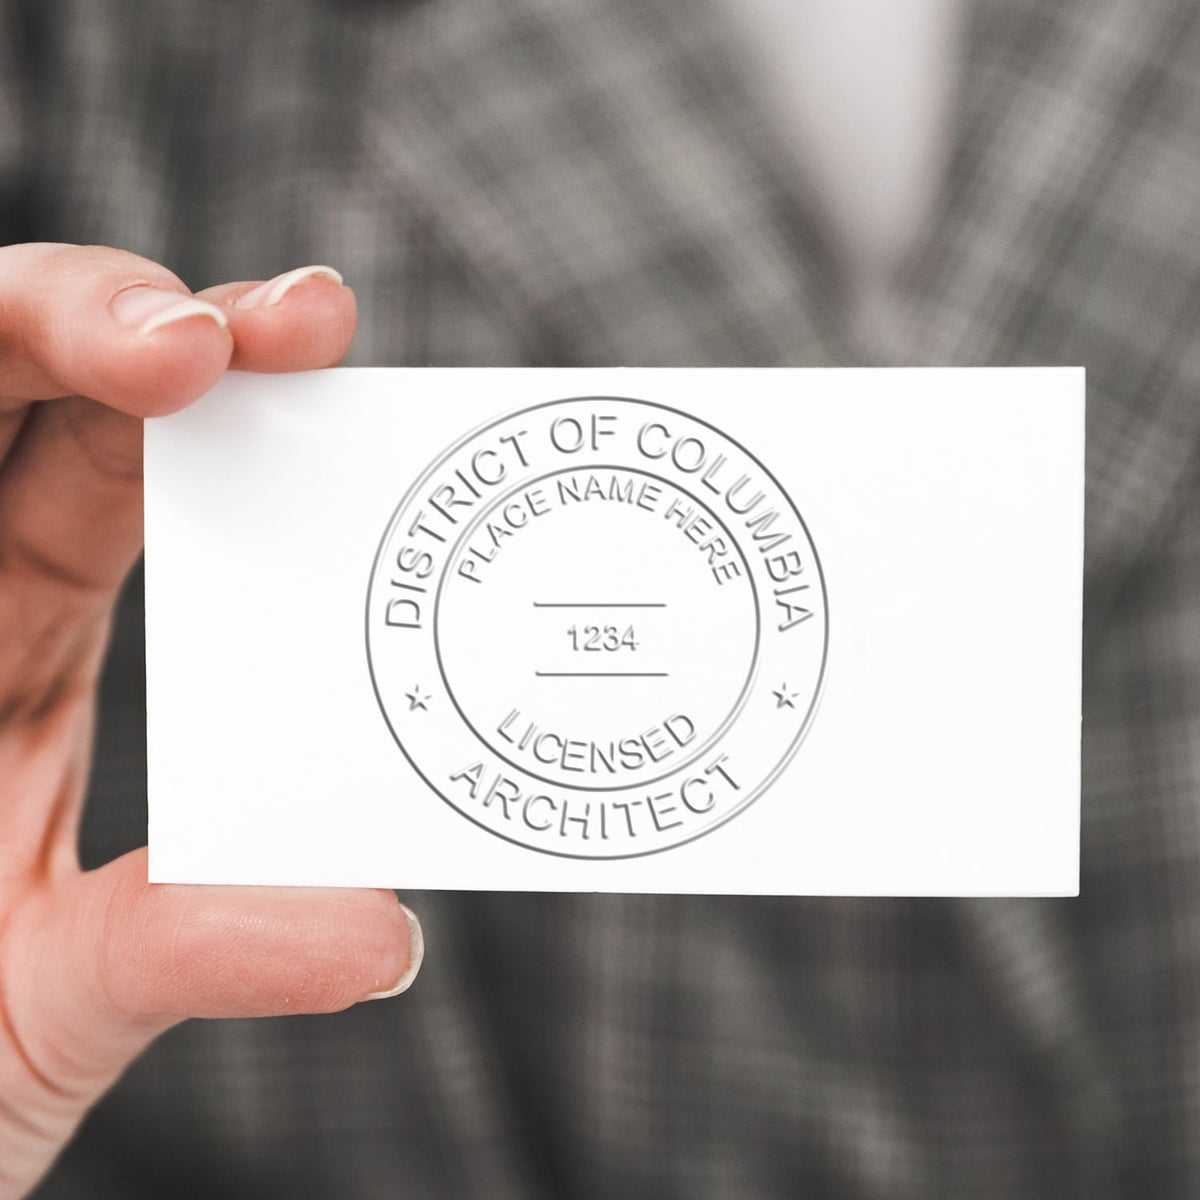 A lifestyle photo showing a stamped image of the Extended Long Reach District of Columbia Architect Seal Embosser on a piece of paper